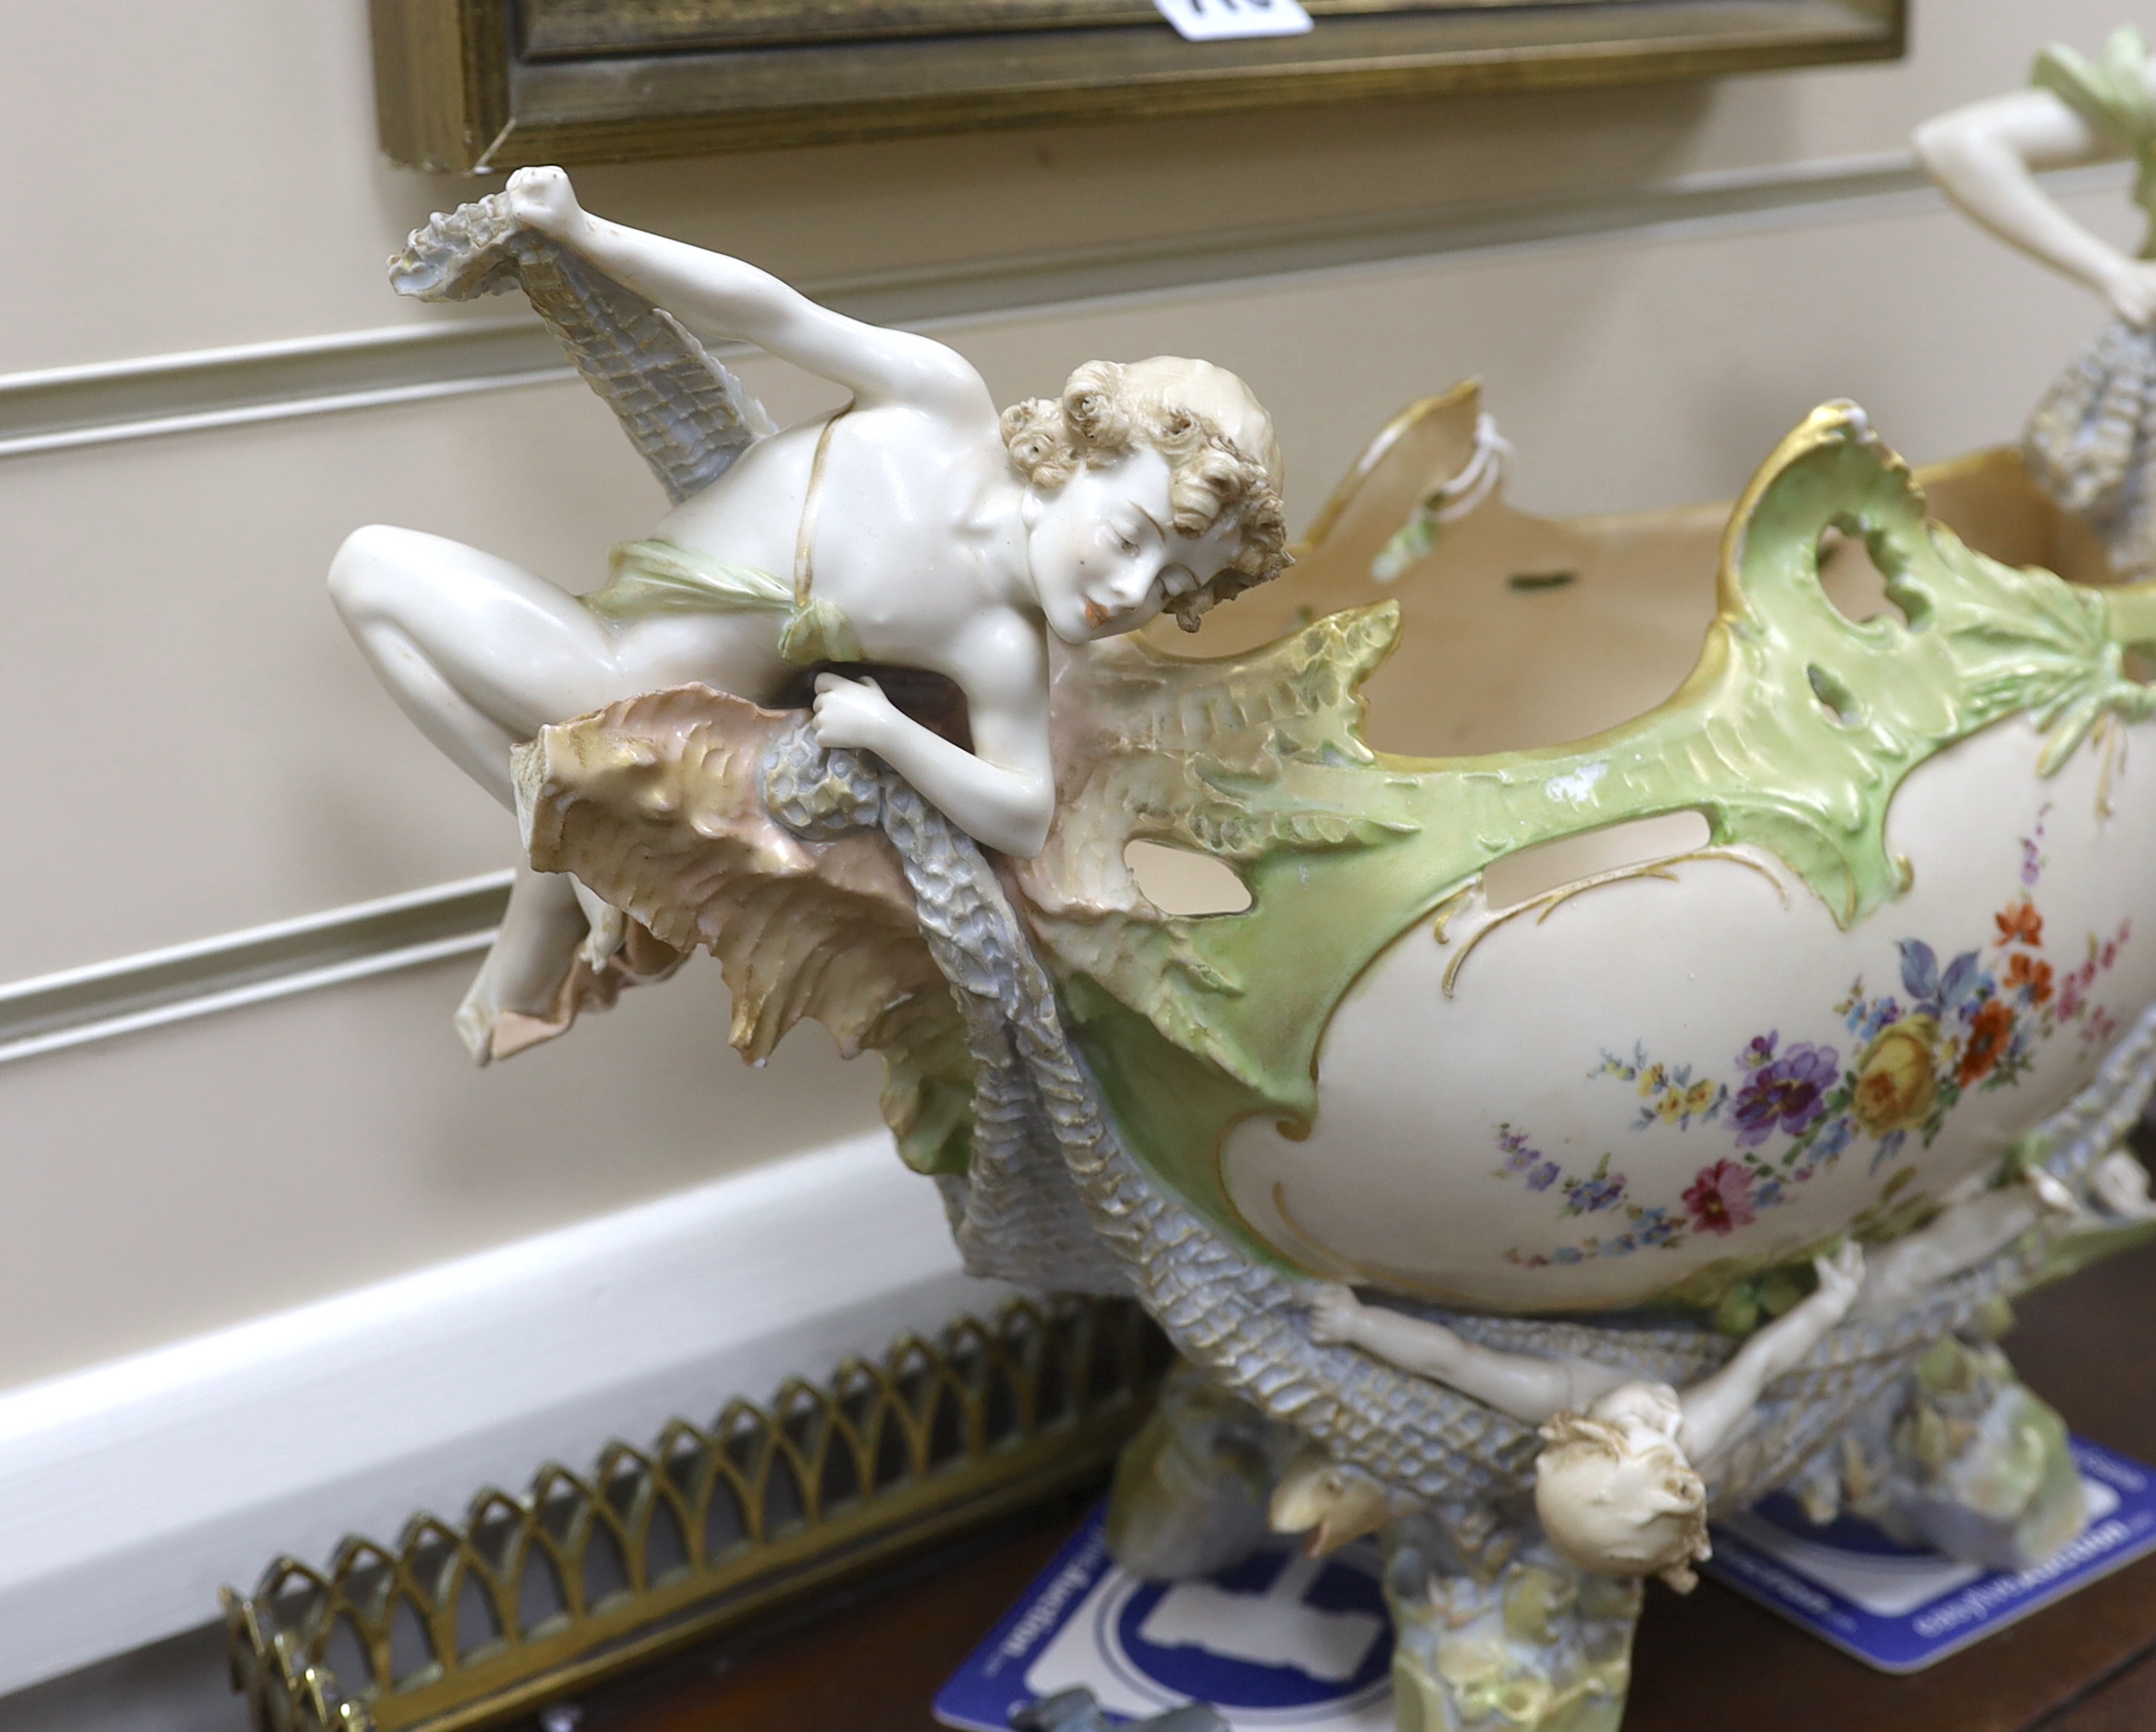 An early 20th century Austrian porcelain figural bowl or centrepiece, 45cm wide